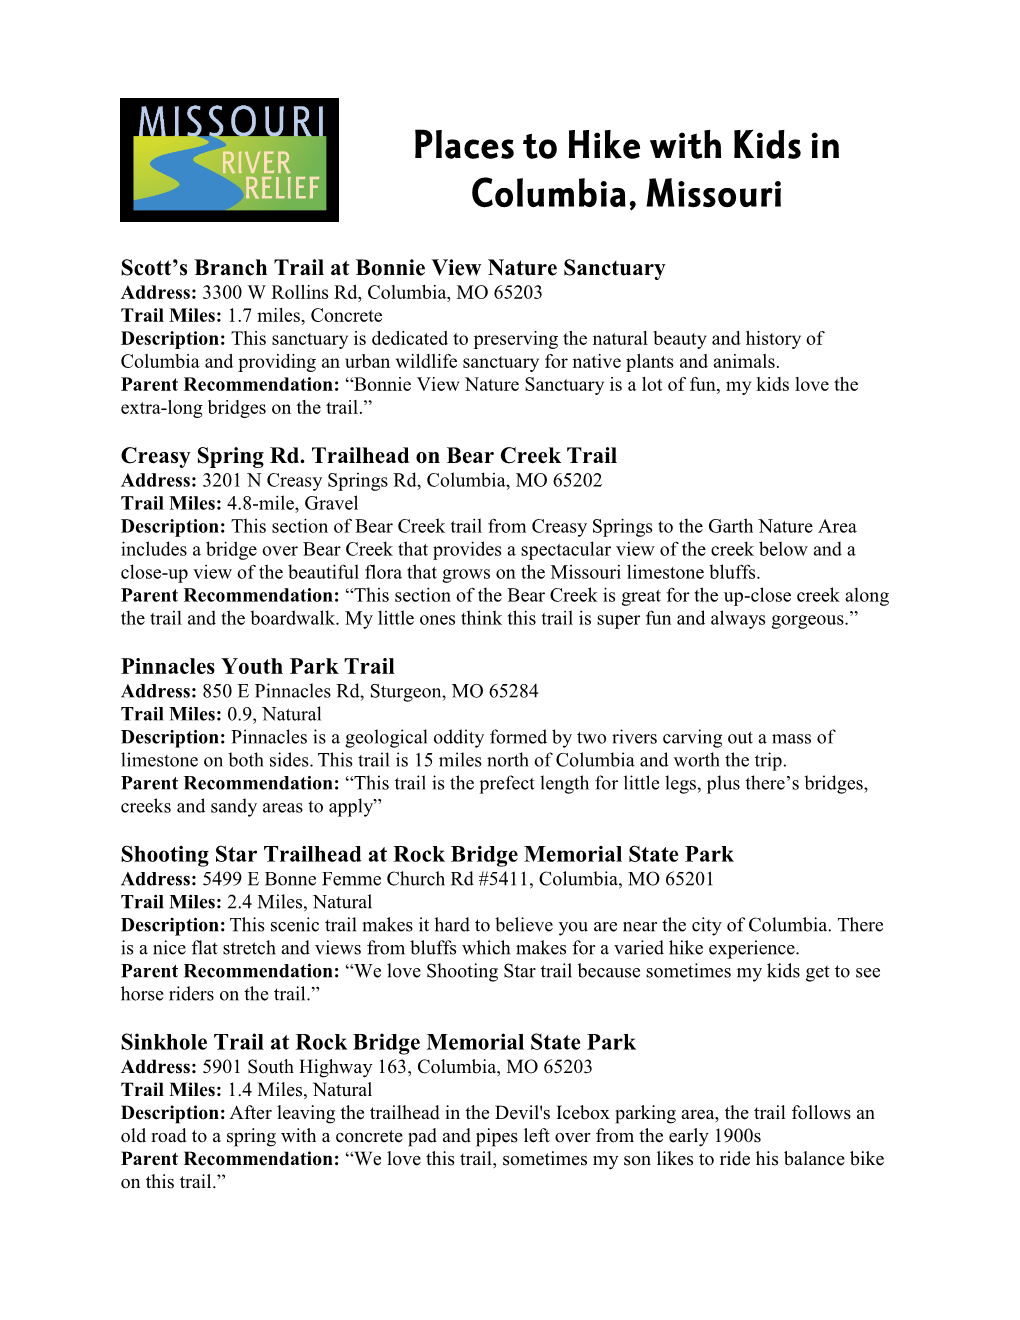 Places to Hike with Kids in Columbia, Missouri